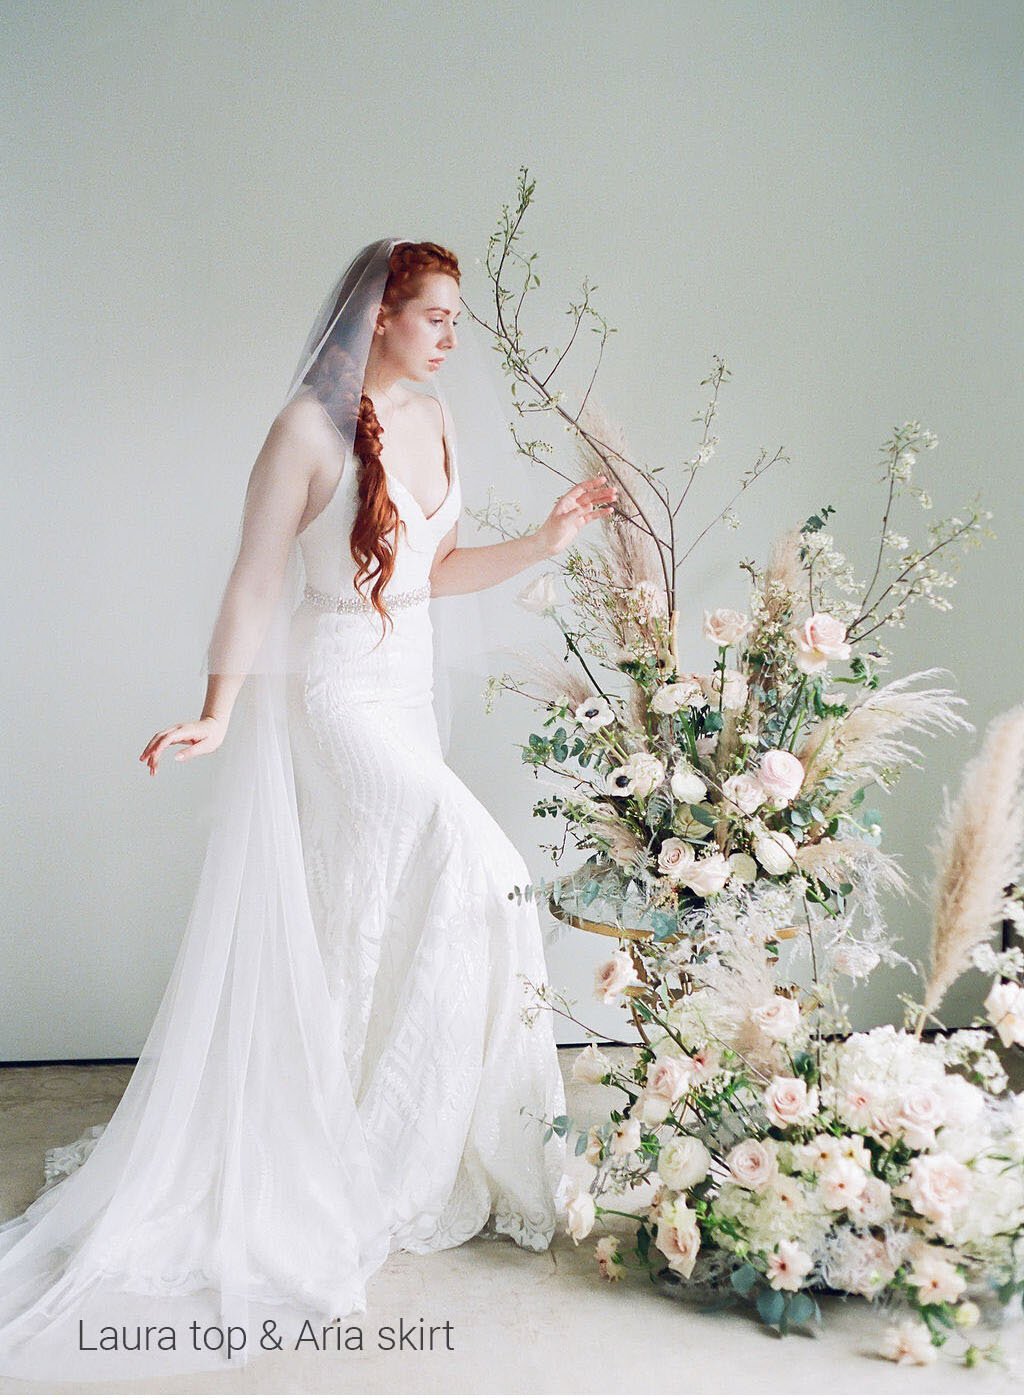 ivory-and-beau-dresses-trunk-show-kathryn-bass-sample-sale-coming-soon-laura-aria4.jpg